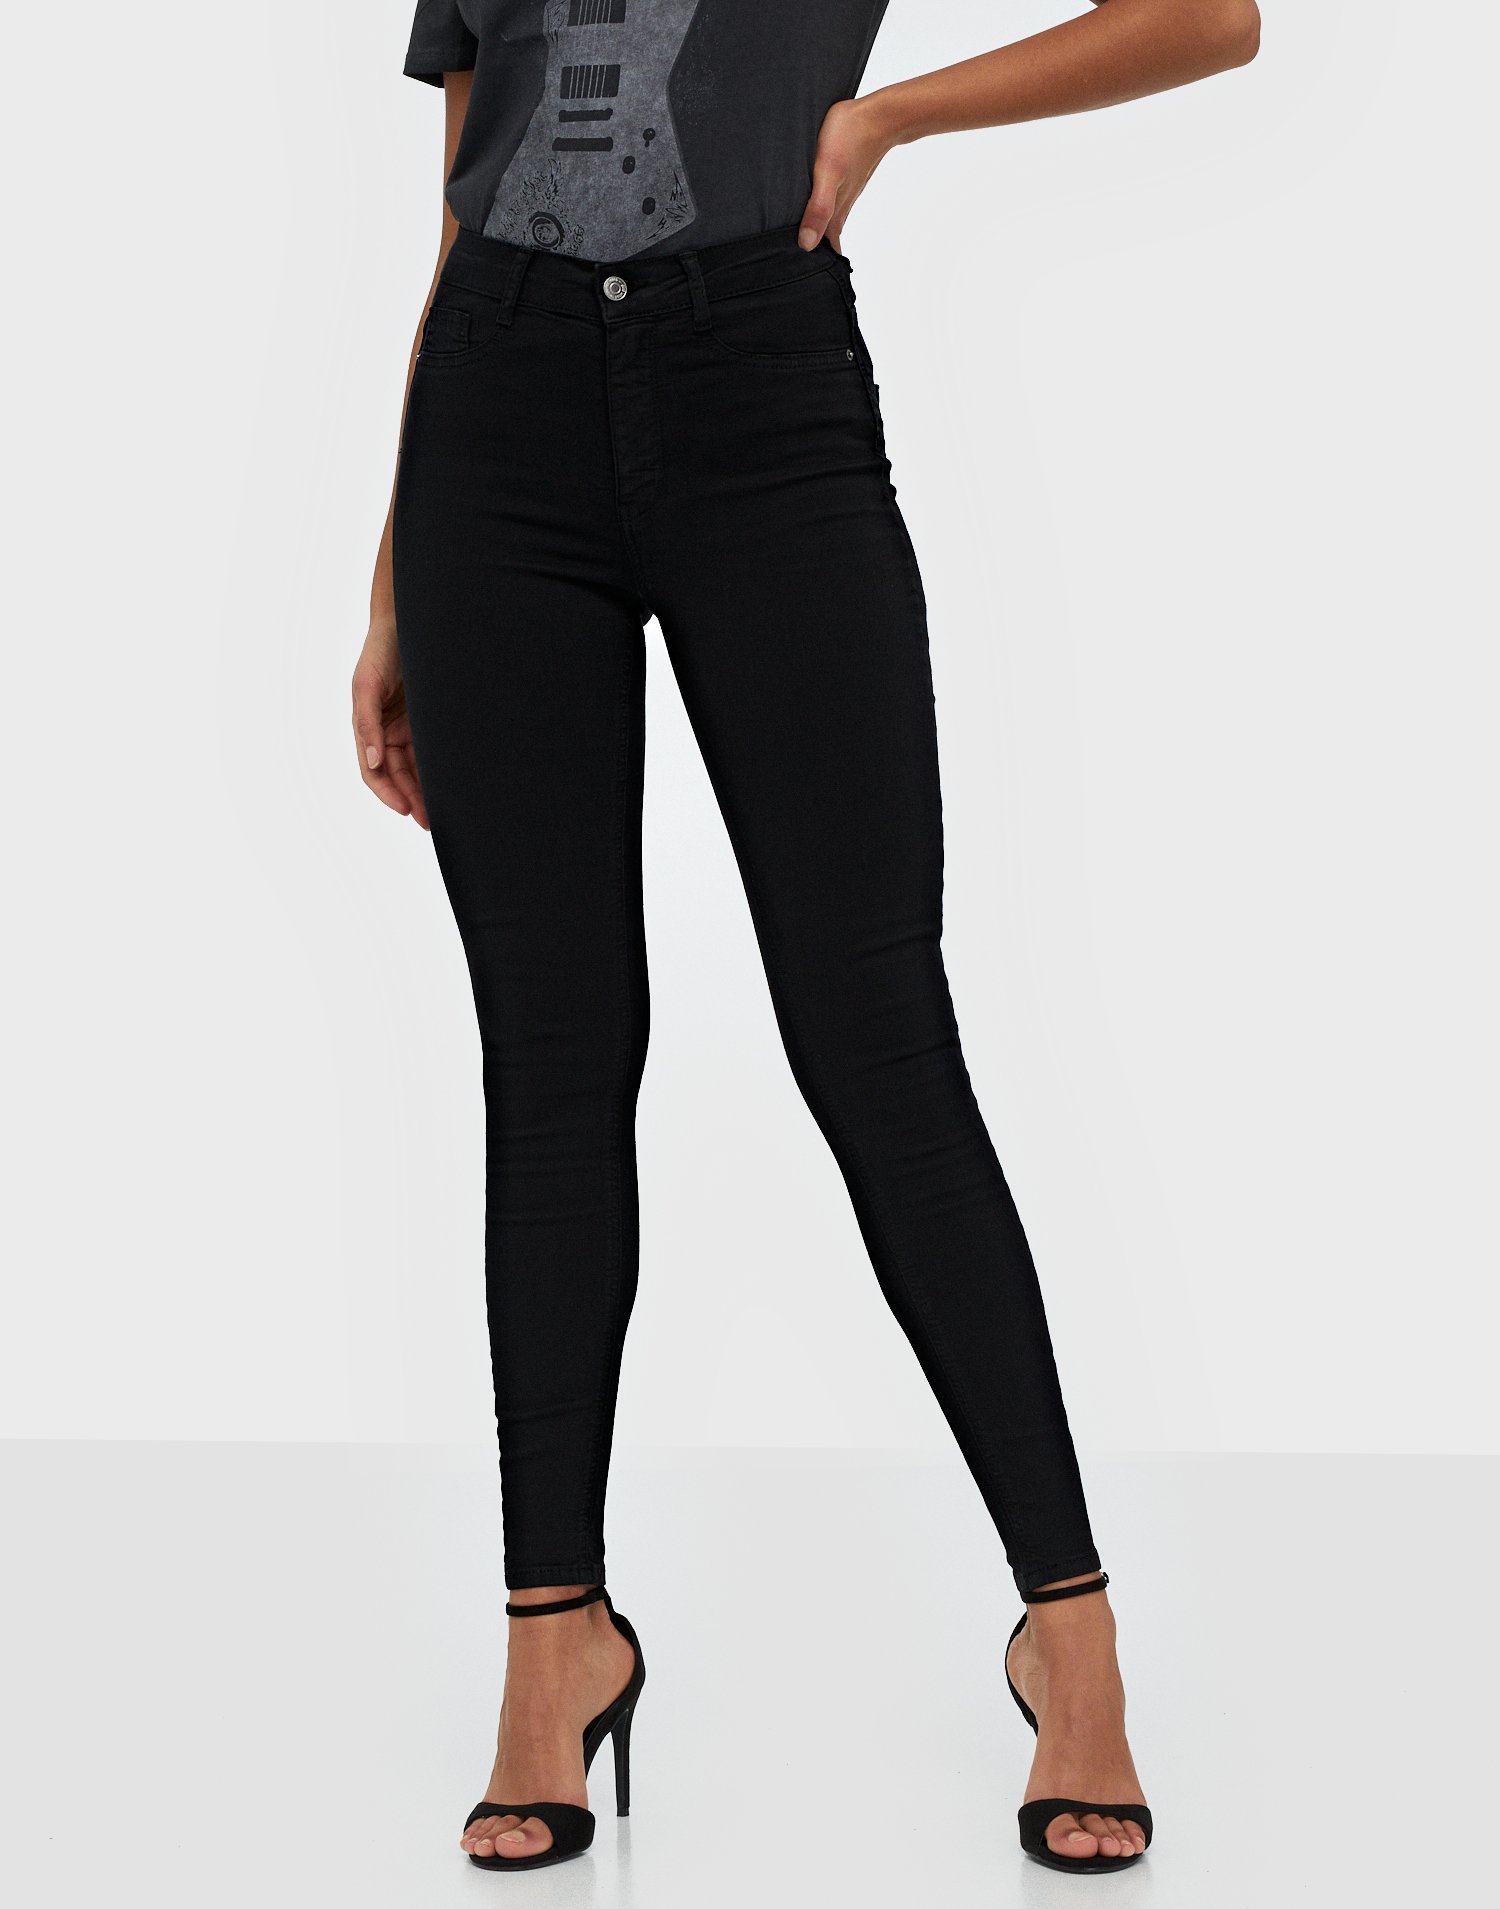 Shop Tricot Molly High Waist Jeans - Black Nelly.com